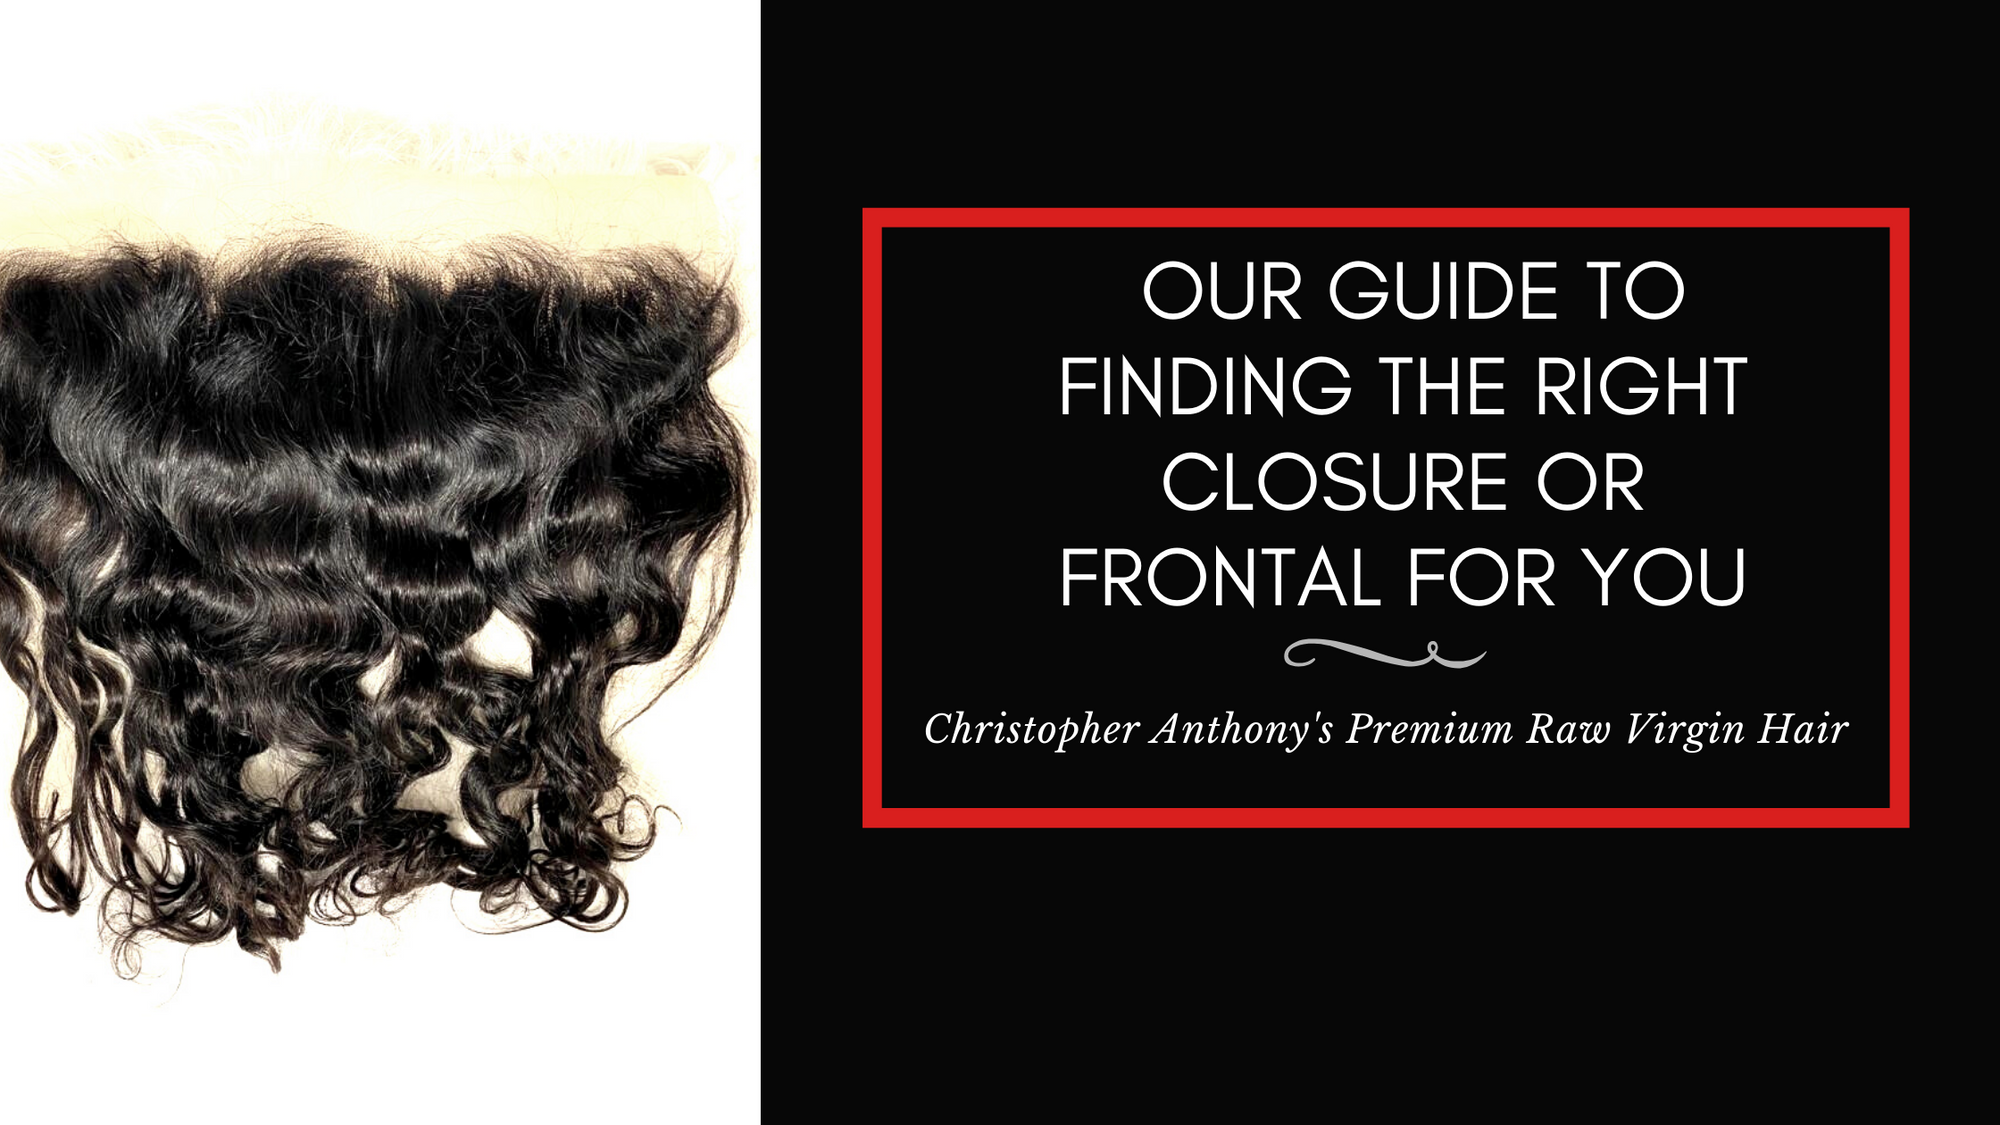 Our Guide to Finding the Right Closure or Frontal for You